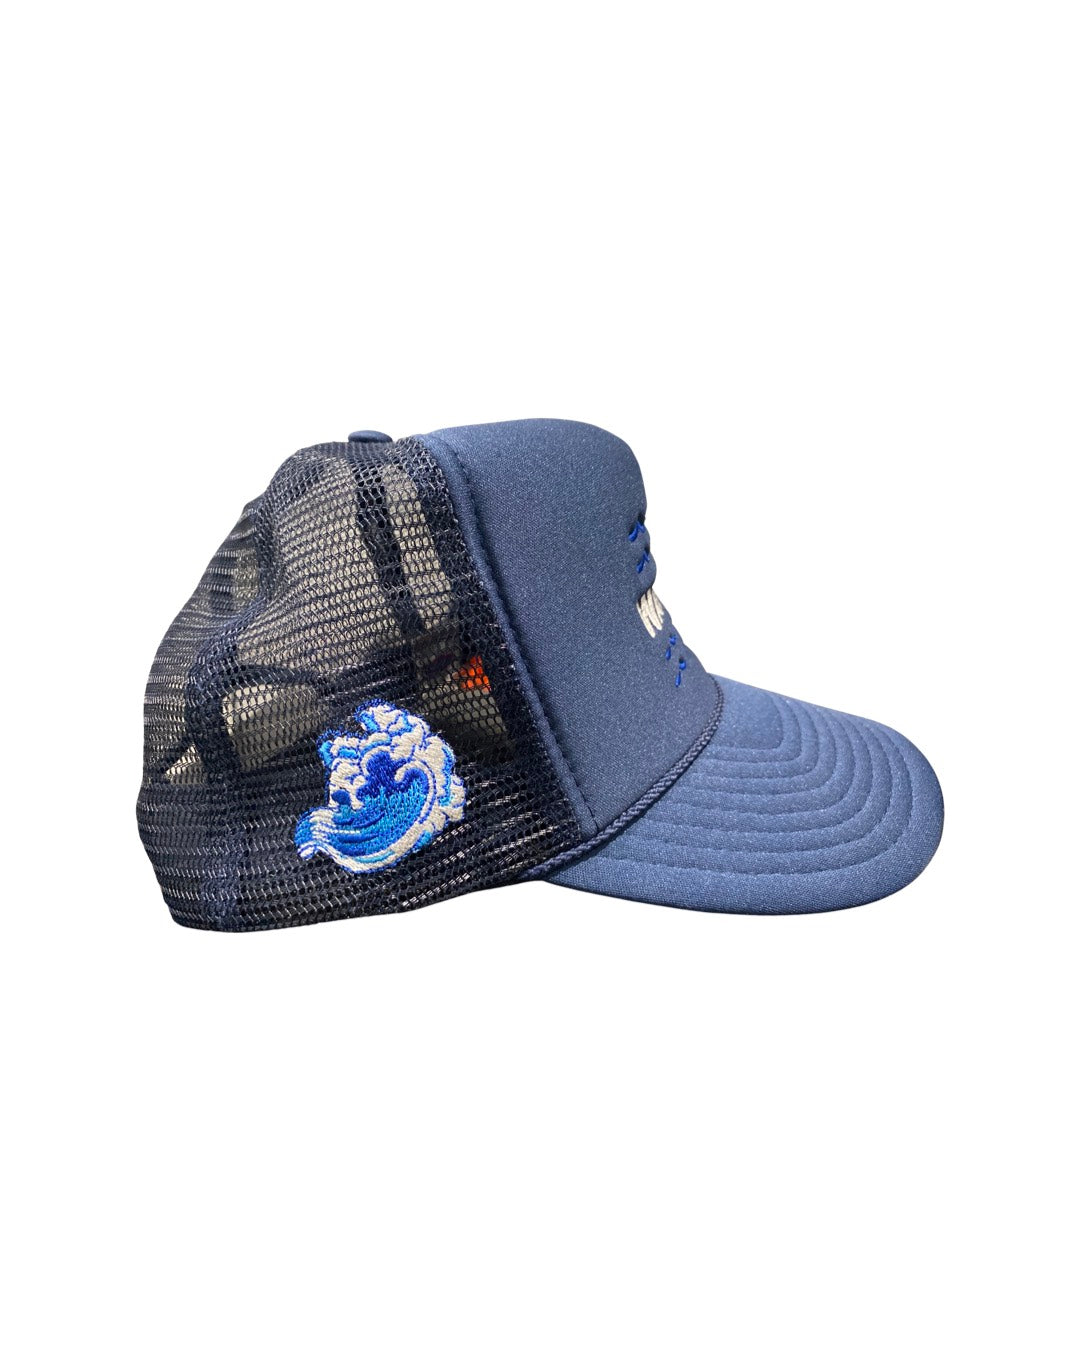 MPR CLOTHING NAVY RIDE THE WAVE TRUCKER HAT